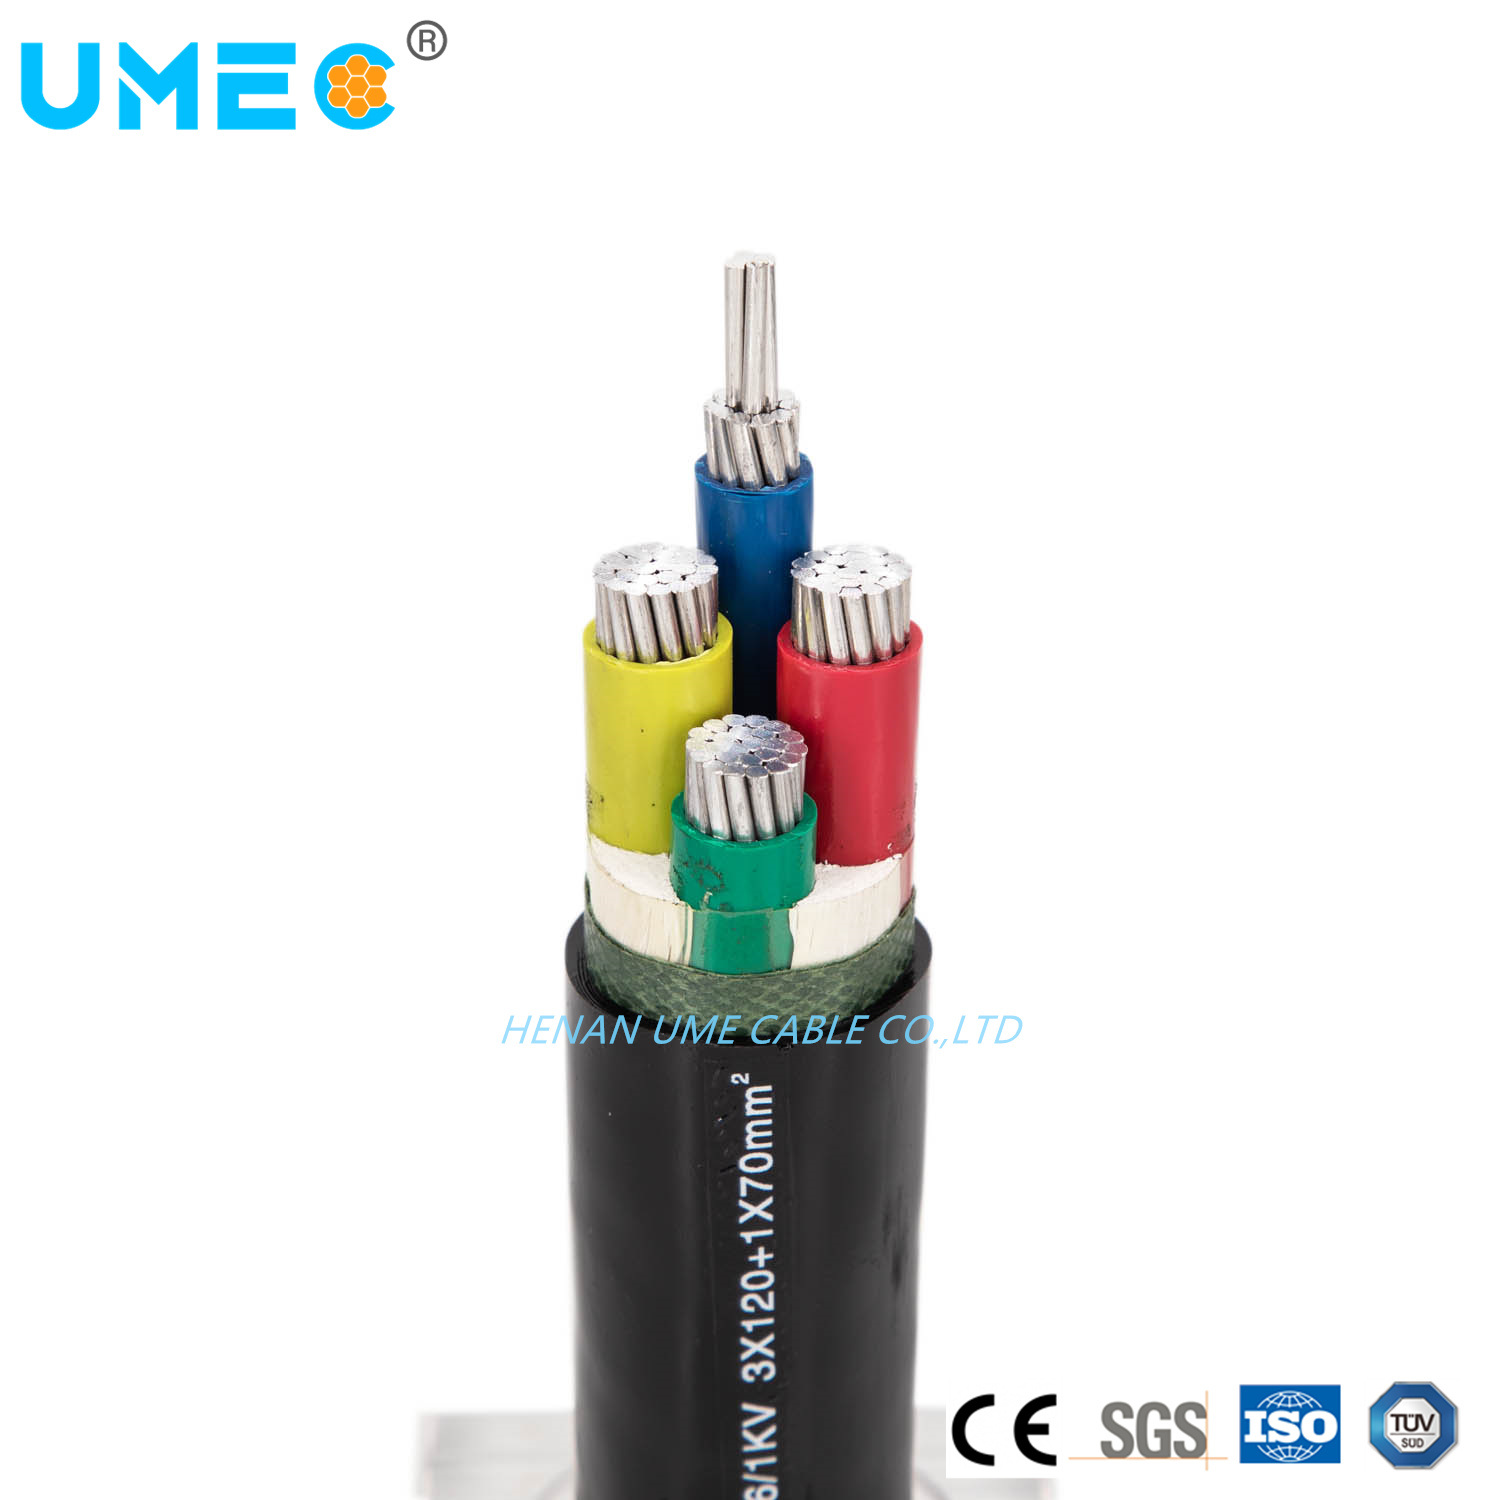 IEC60502 Standard 4X0.5 4X0.75 4X1 4X1.5 4X2.5 4X4 20AWG 18AWG 17AWG 16AWG 14AWG 12AWG Unshielded/Shielded Flexible Multiconductor PVC Power Cable